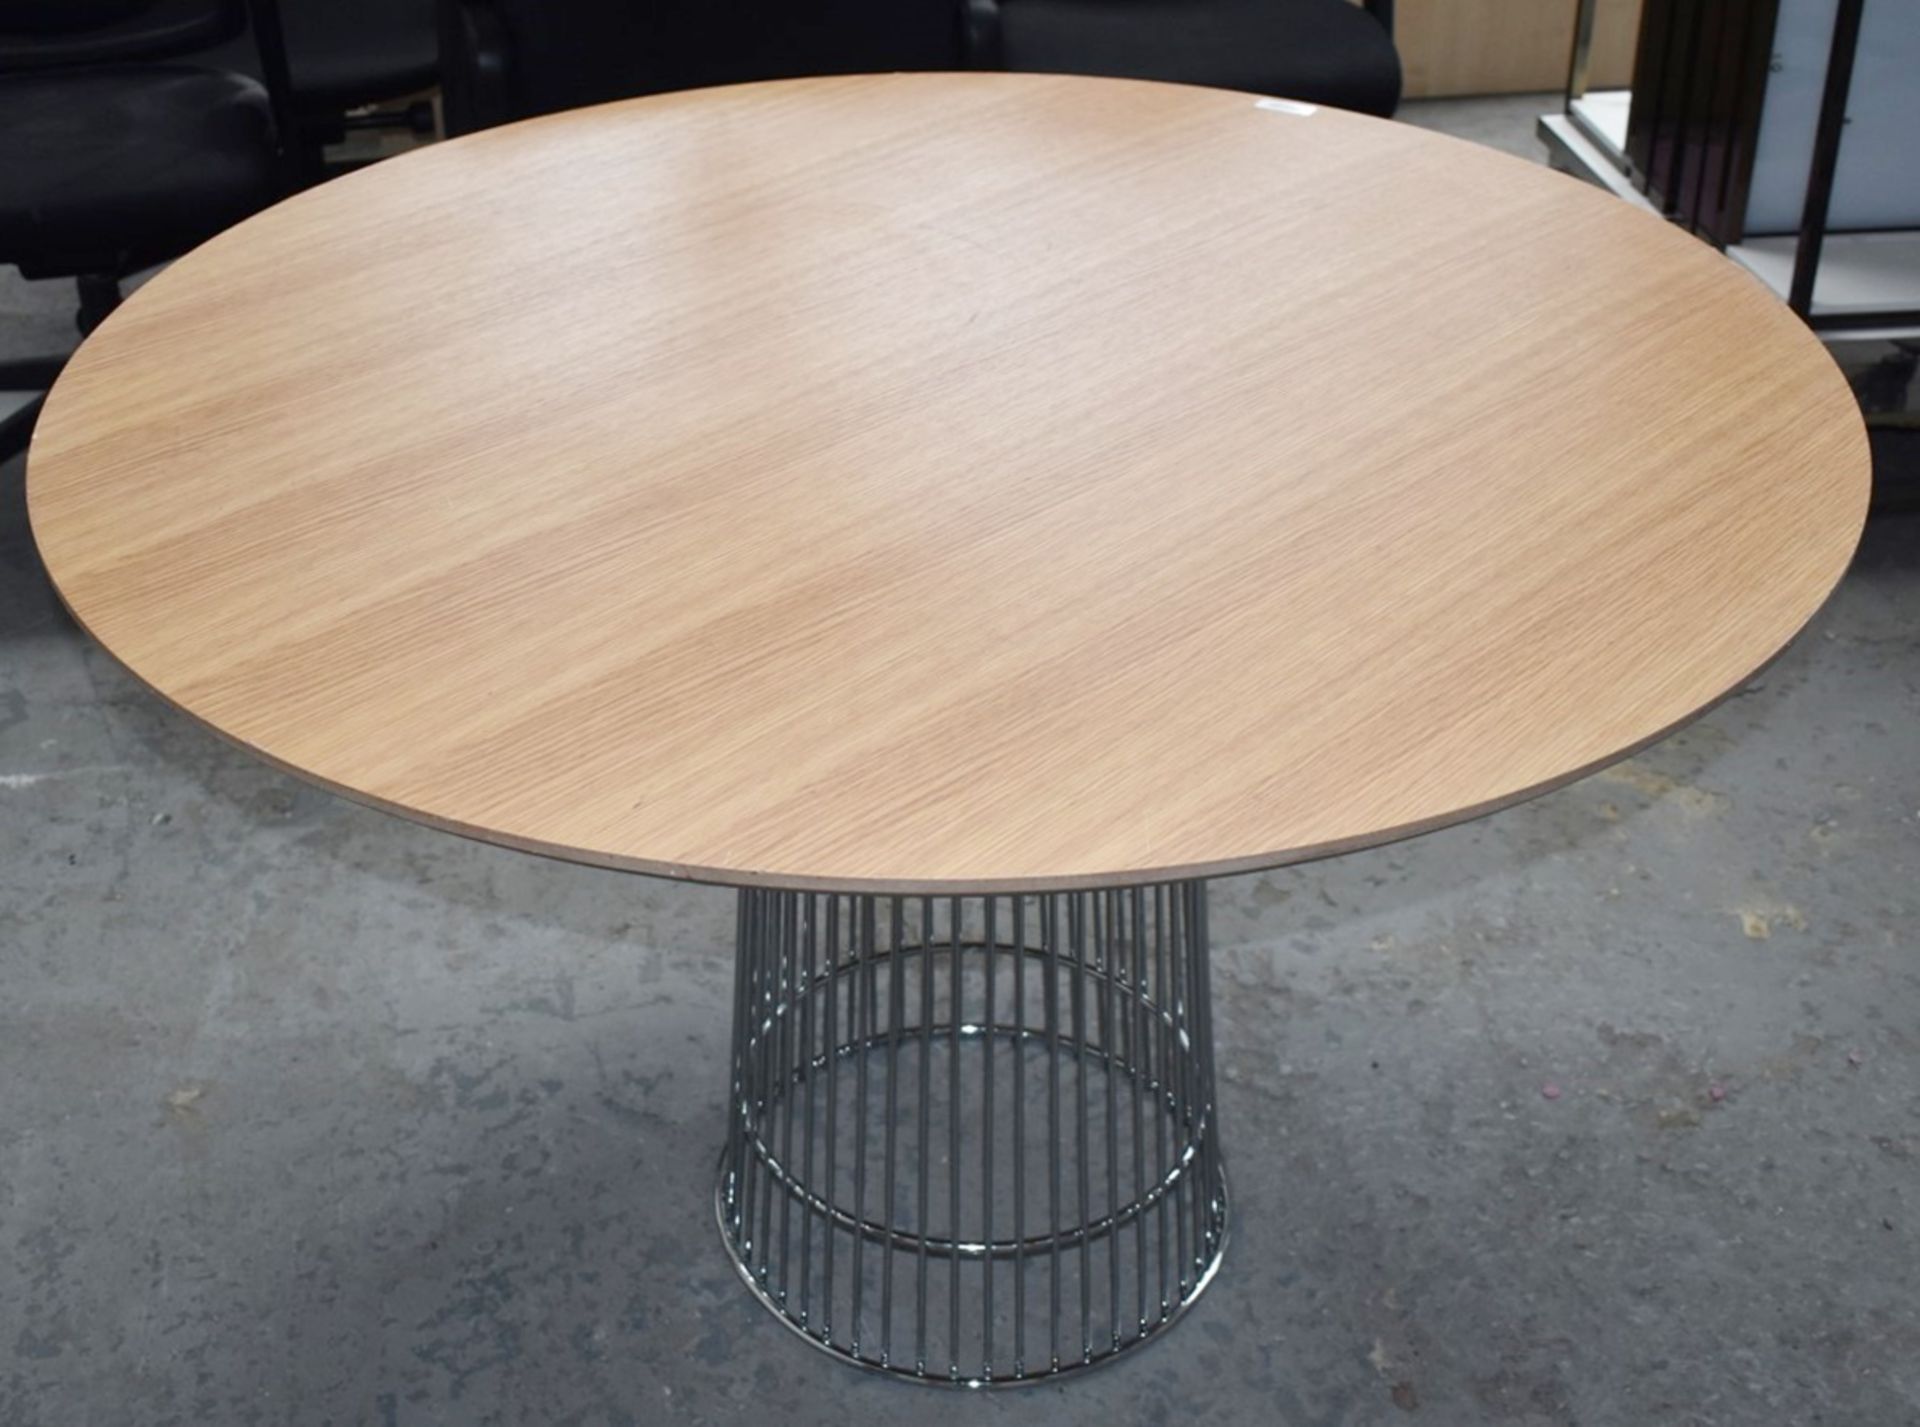 1 x Temahome Dining Table With a Large Round Table Top and Stylish Chrome Base - 150cm Diameter - Image 4 of 13